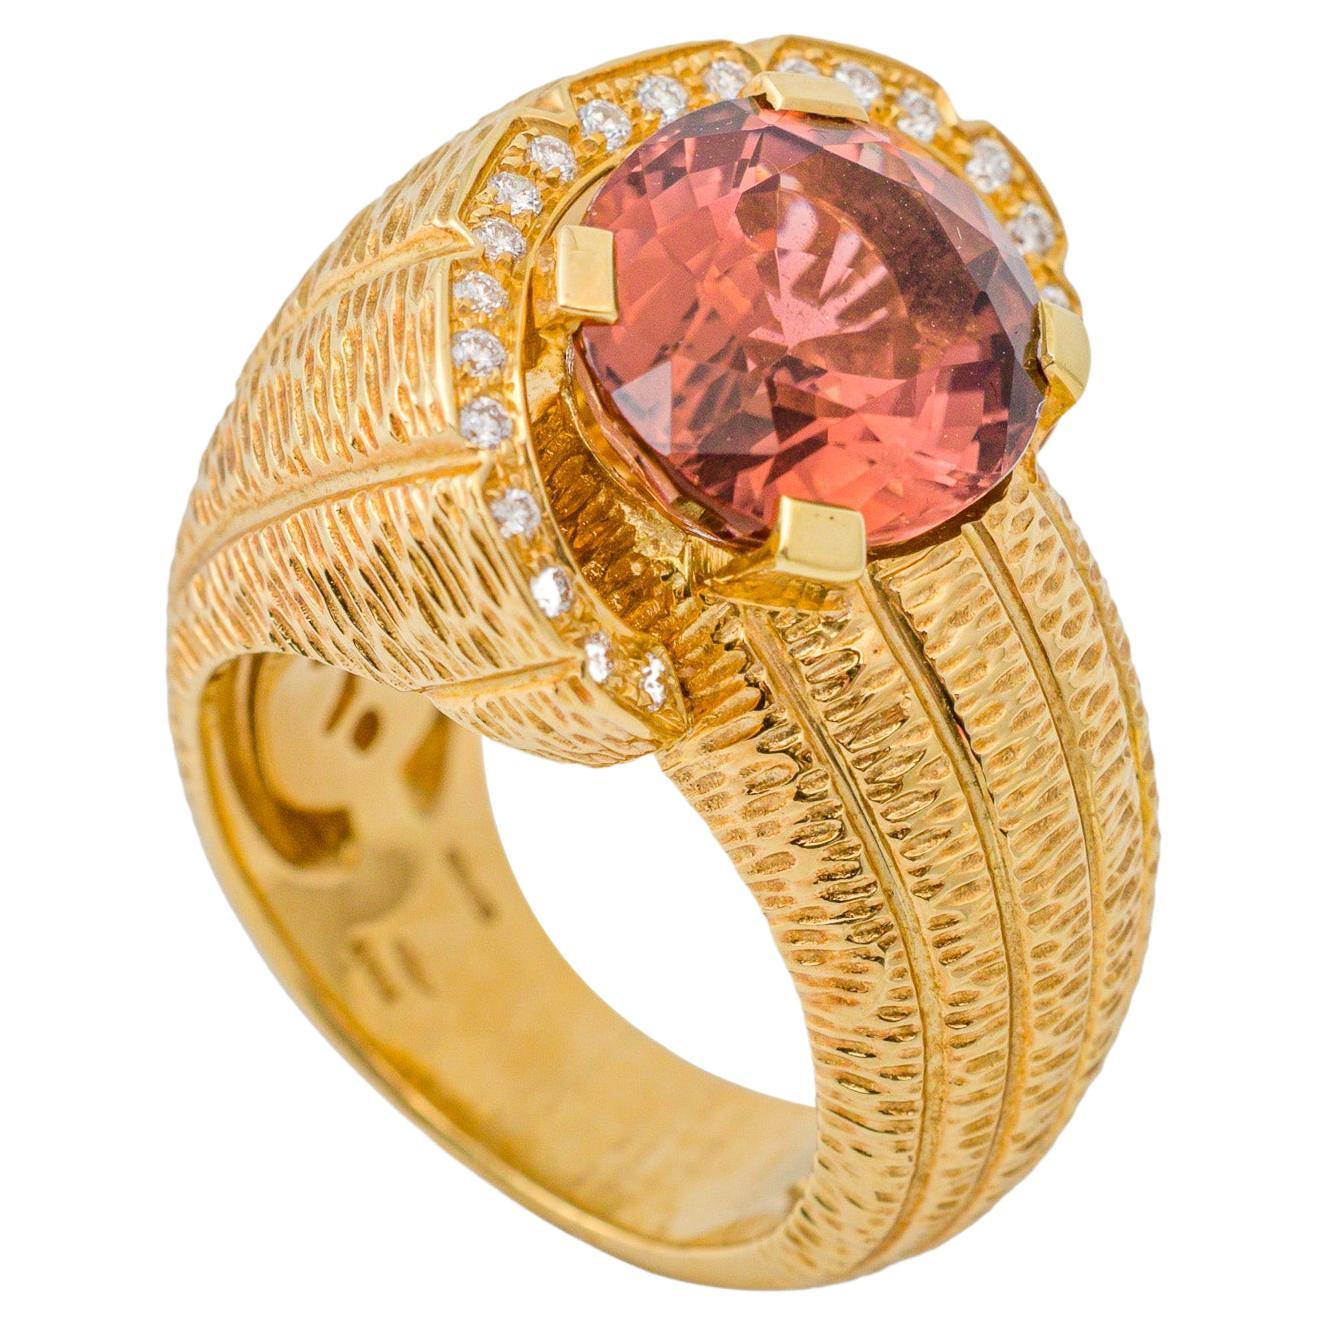 "Costis" Snail Shell Ring with Central Orange Tourmaline of 8.12 Carats For Sale